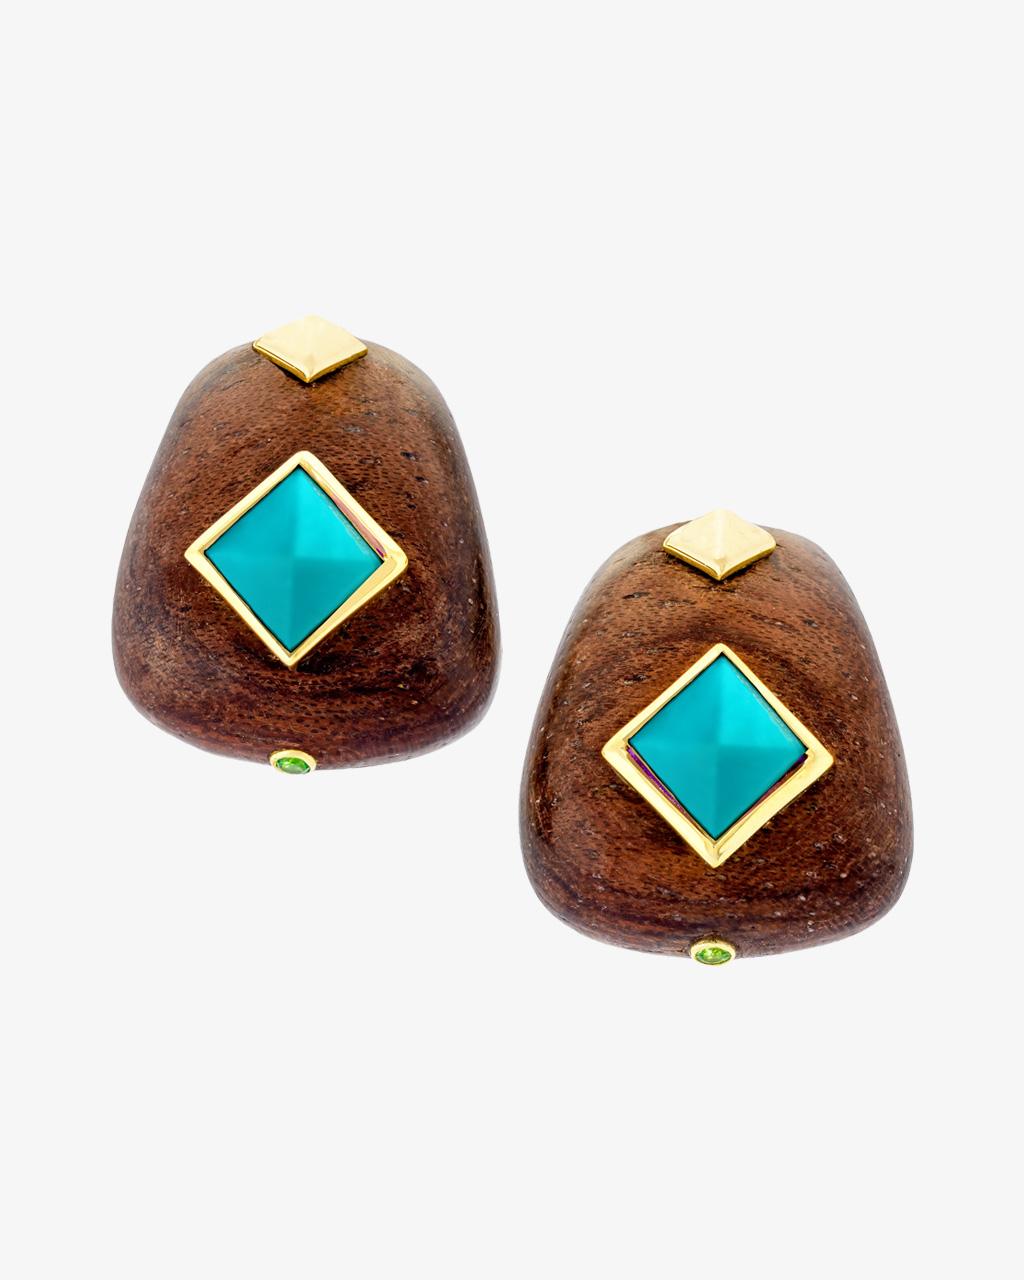 Rosewood & Turquoise Pyramid Earrings